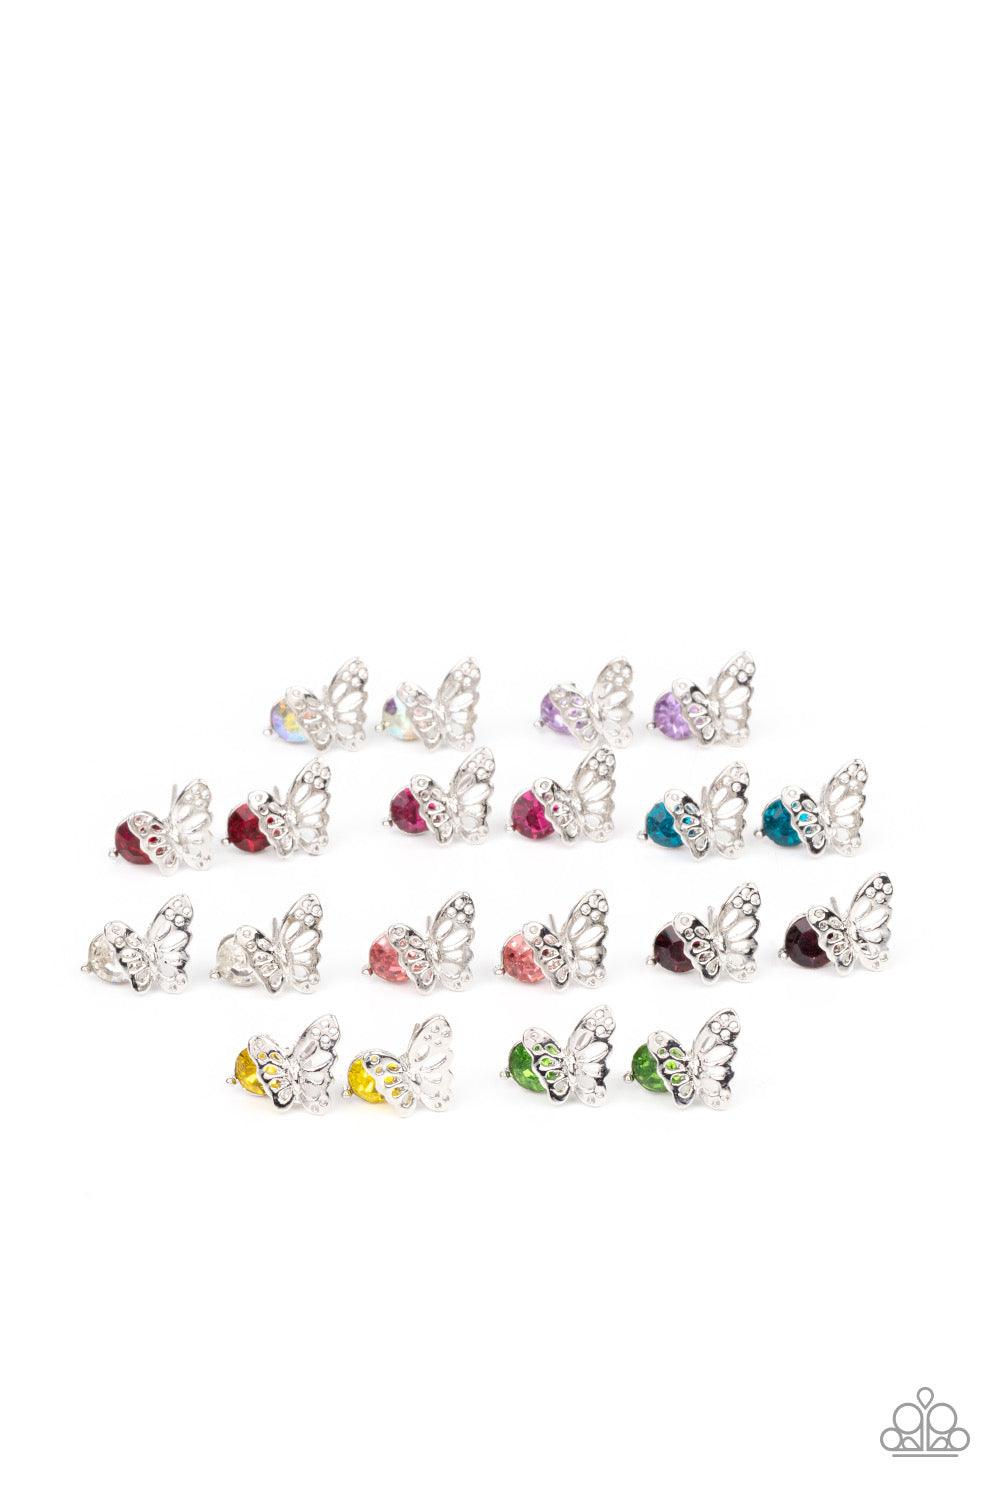 Paparazzi Accessories Starlet Shimmer Earrings #21 - Red Airy silver butterfly frames featuring glittery rhinestones vary in shades of green, yellow purple, pink, white, blue, red, purple, and multicolored. Earrings attach to standard post fittings. Jewel